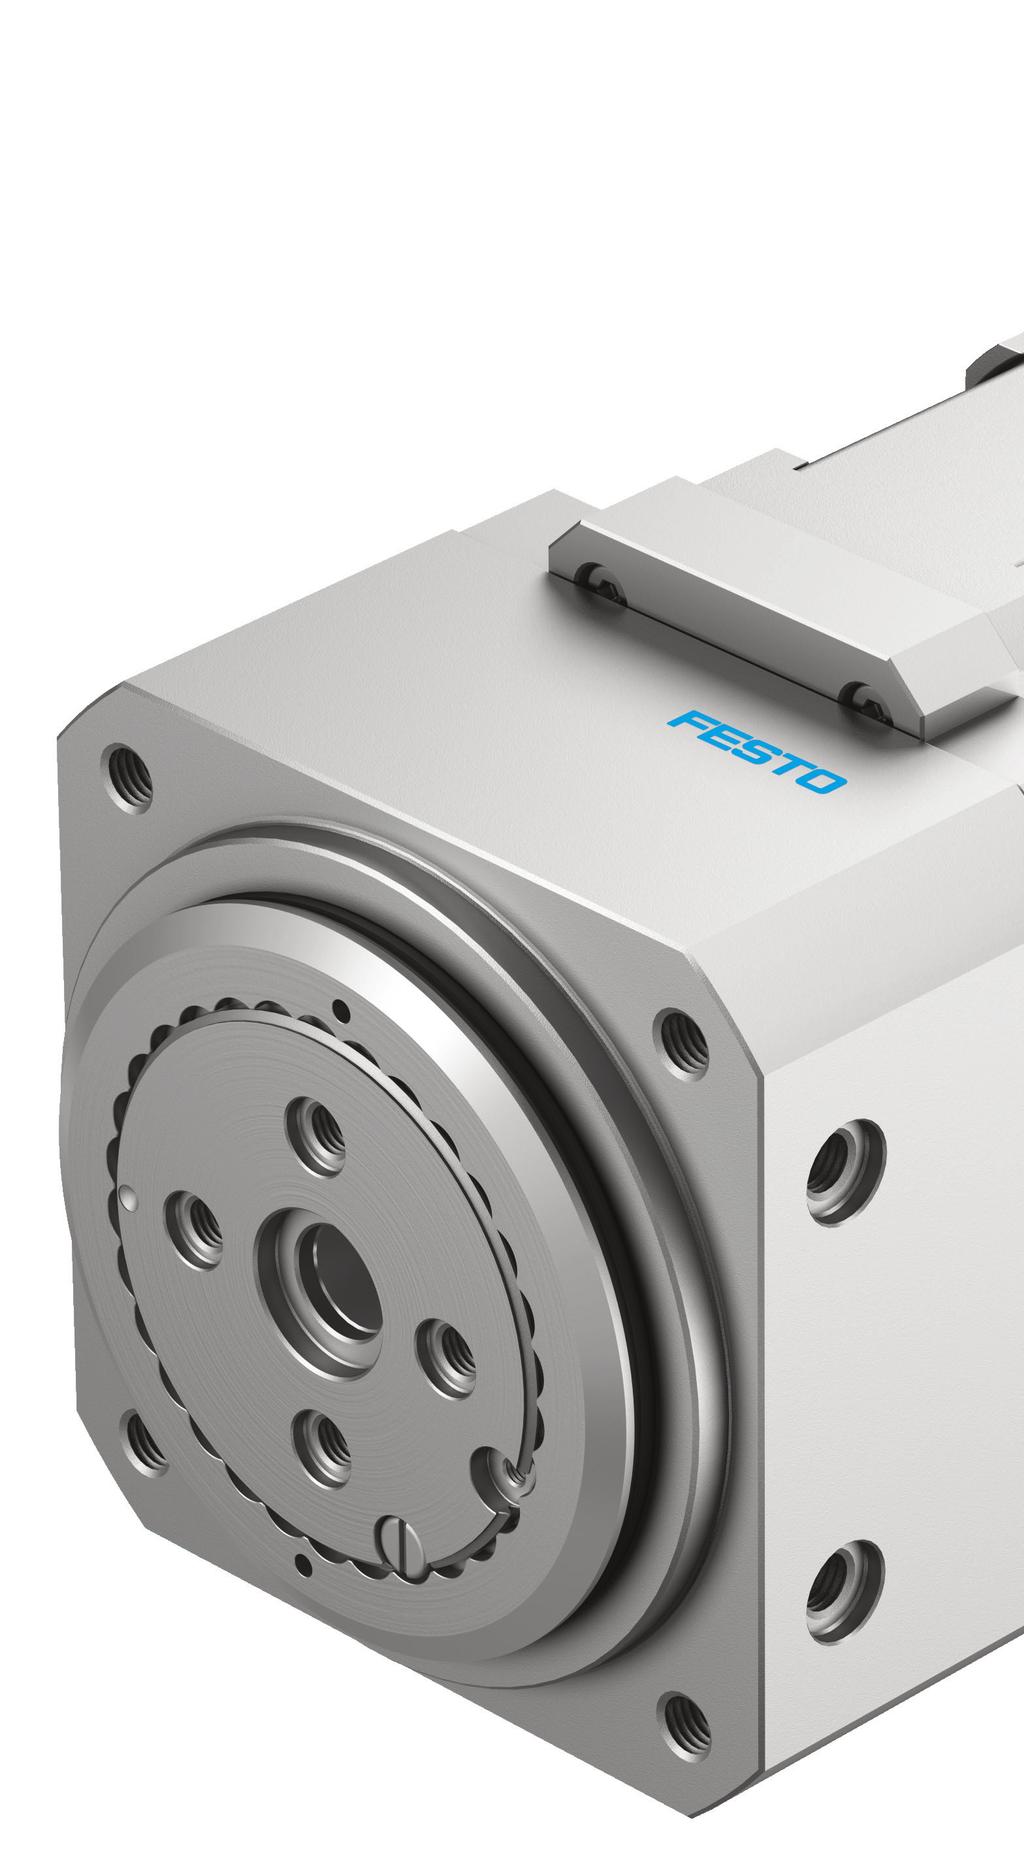 Rotary actuator ERMO Infinite turning under high load The rotary axis ERMO offers a complete solution for turning and aligning parts and workpieces even when